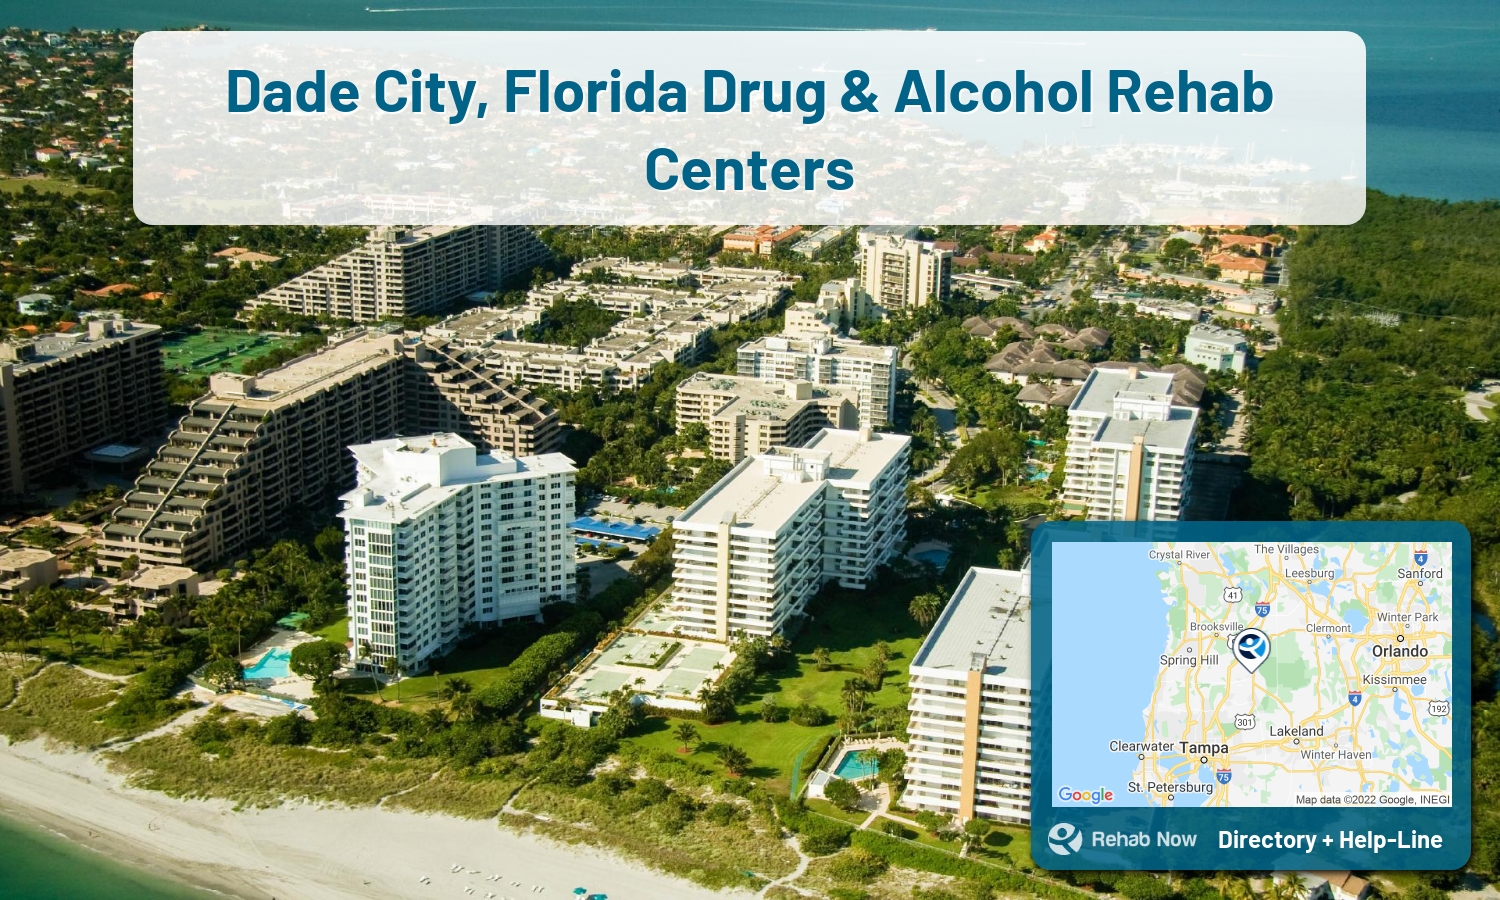 View options, availability, treatment methods, and more, for drug rehab and alcohol treatment in Dade City, Florida